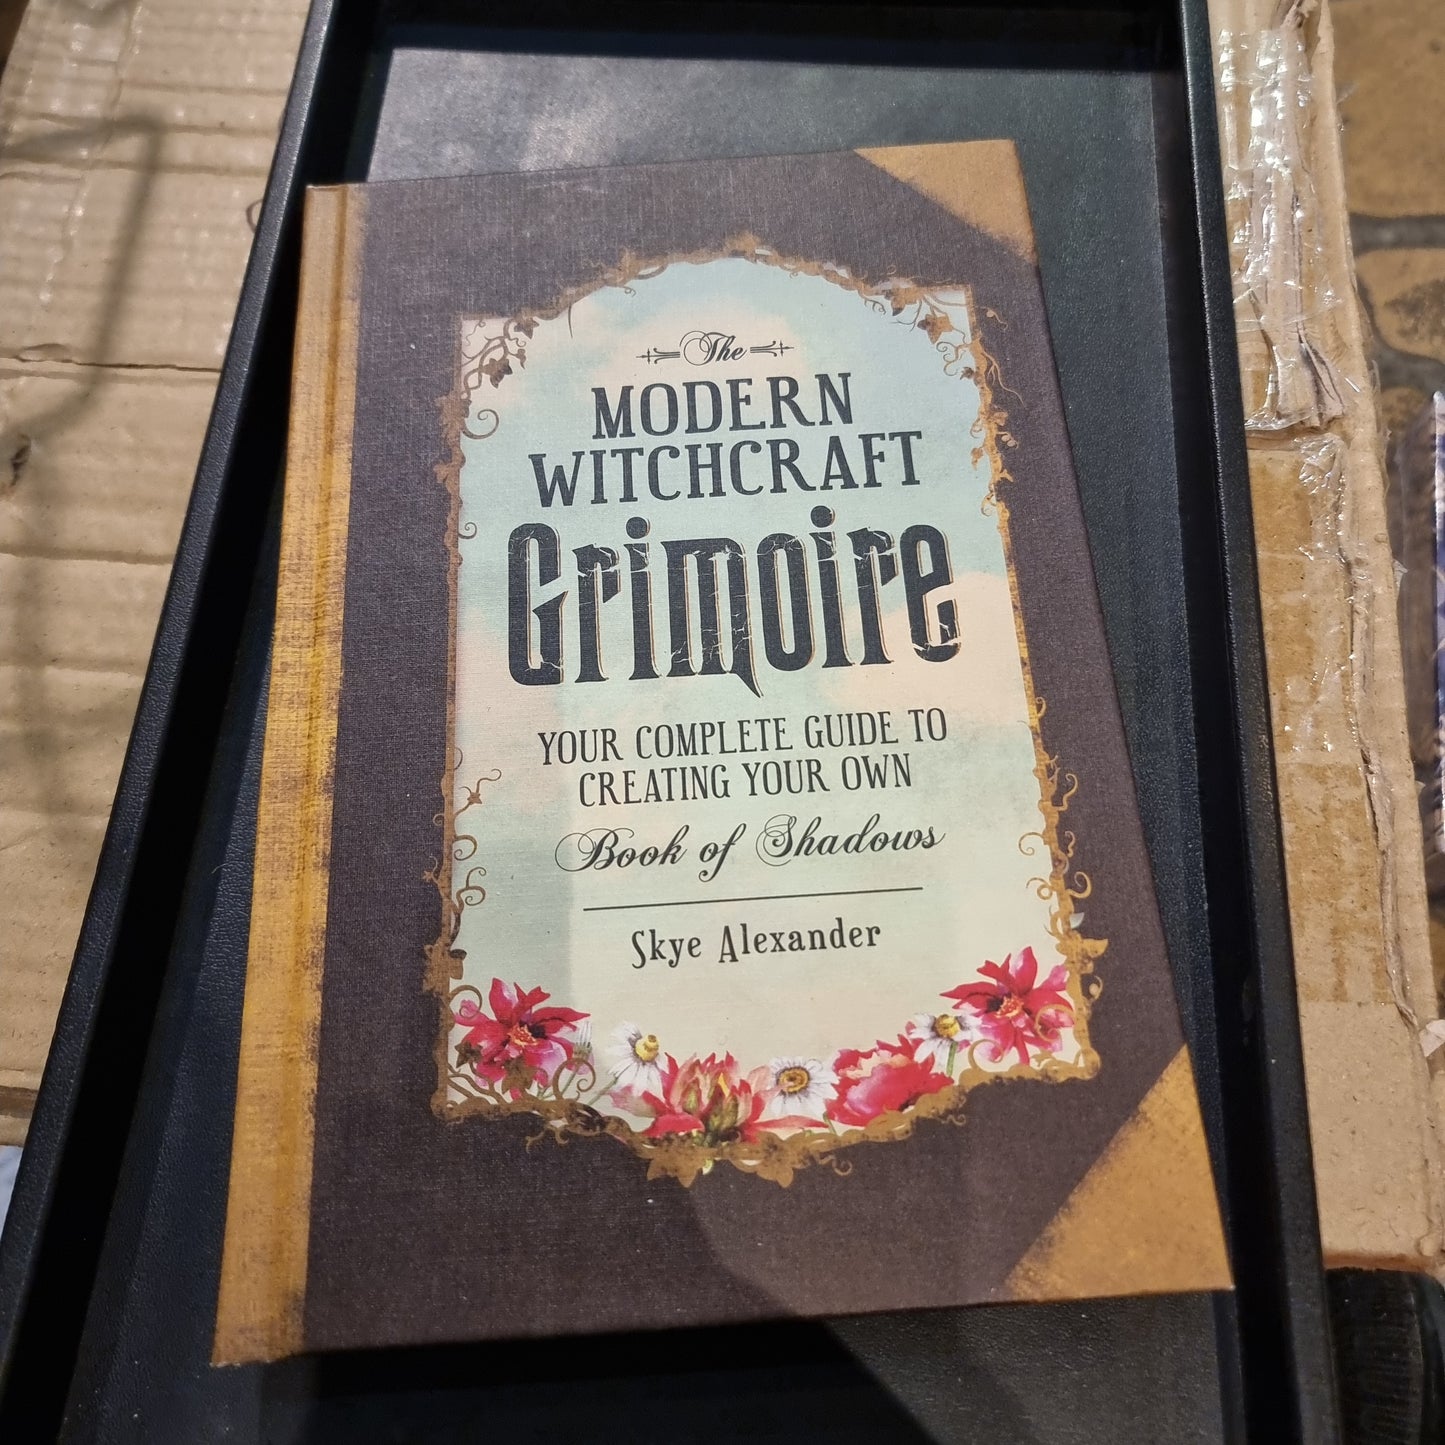 The modern witchcraft grimoire - Rivendell Shop